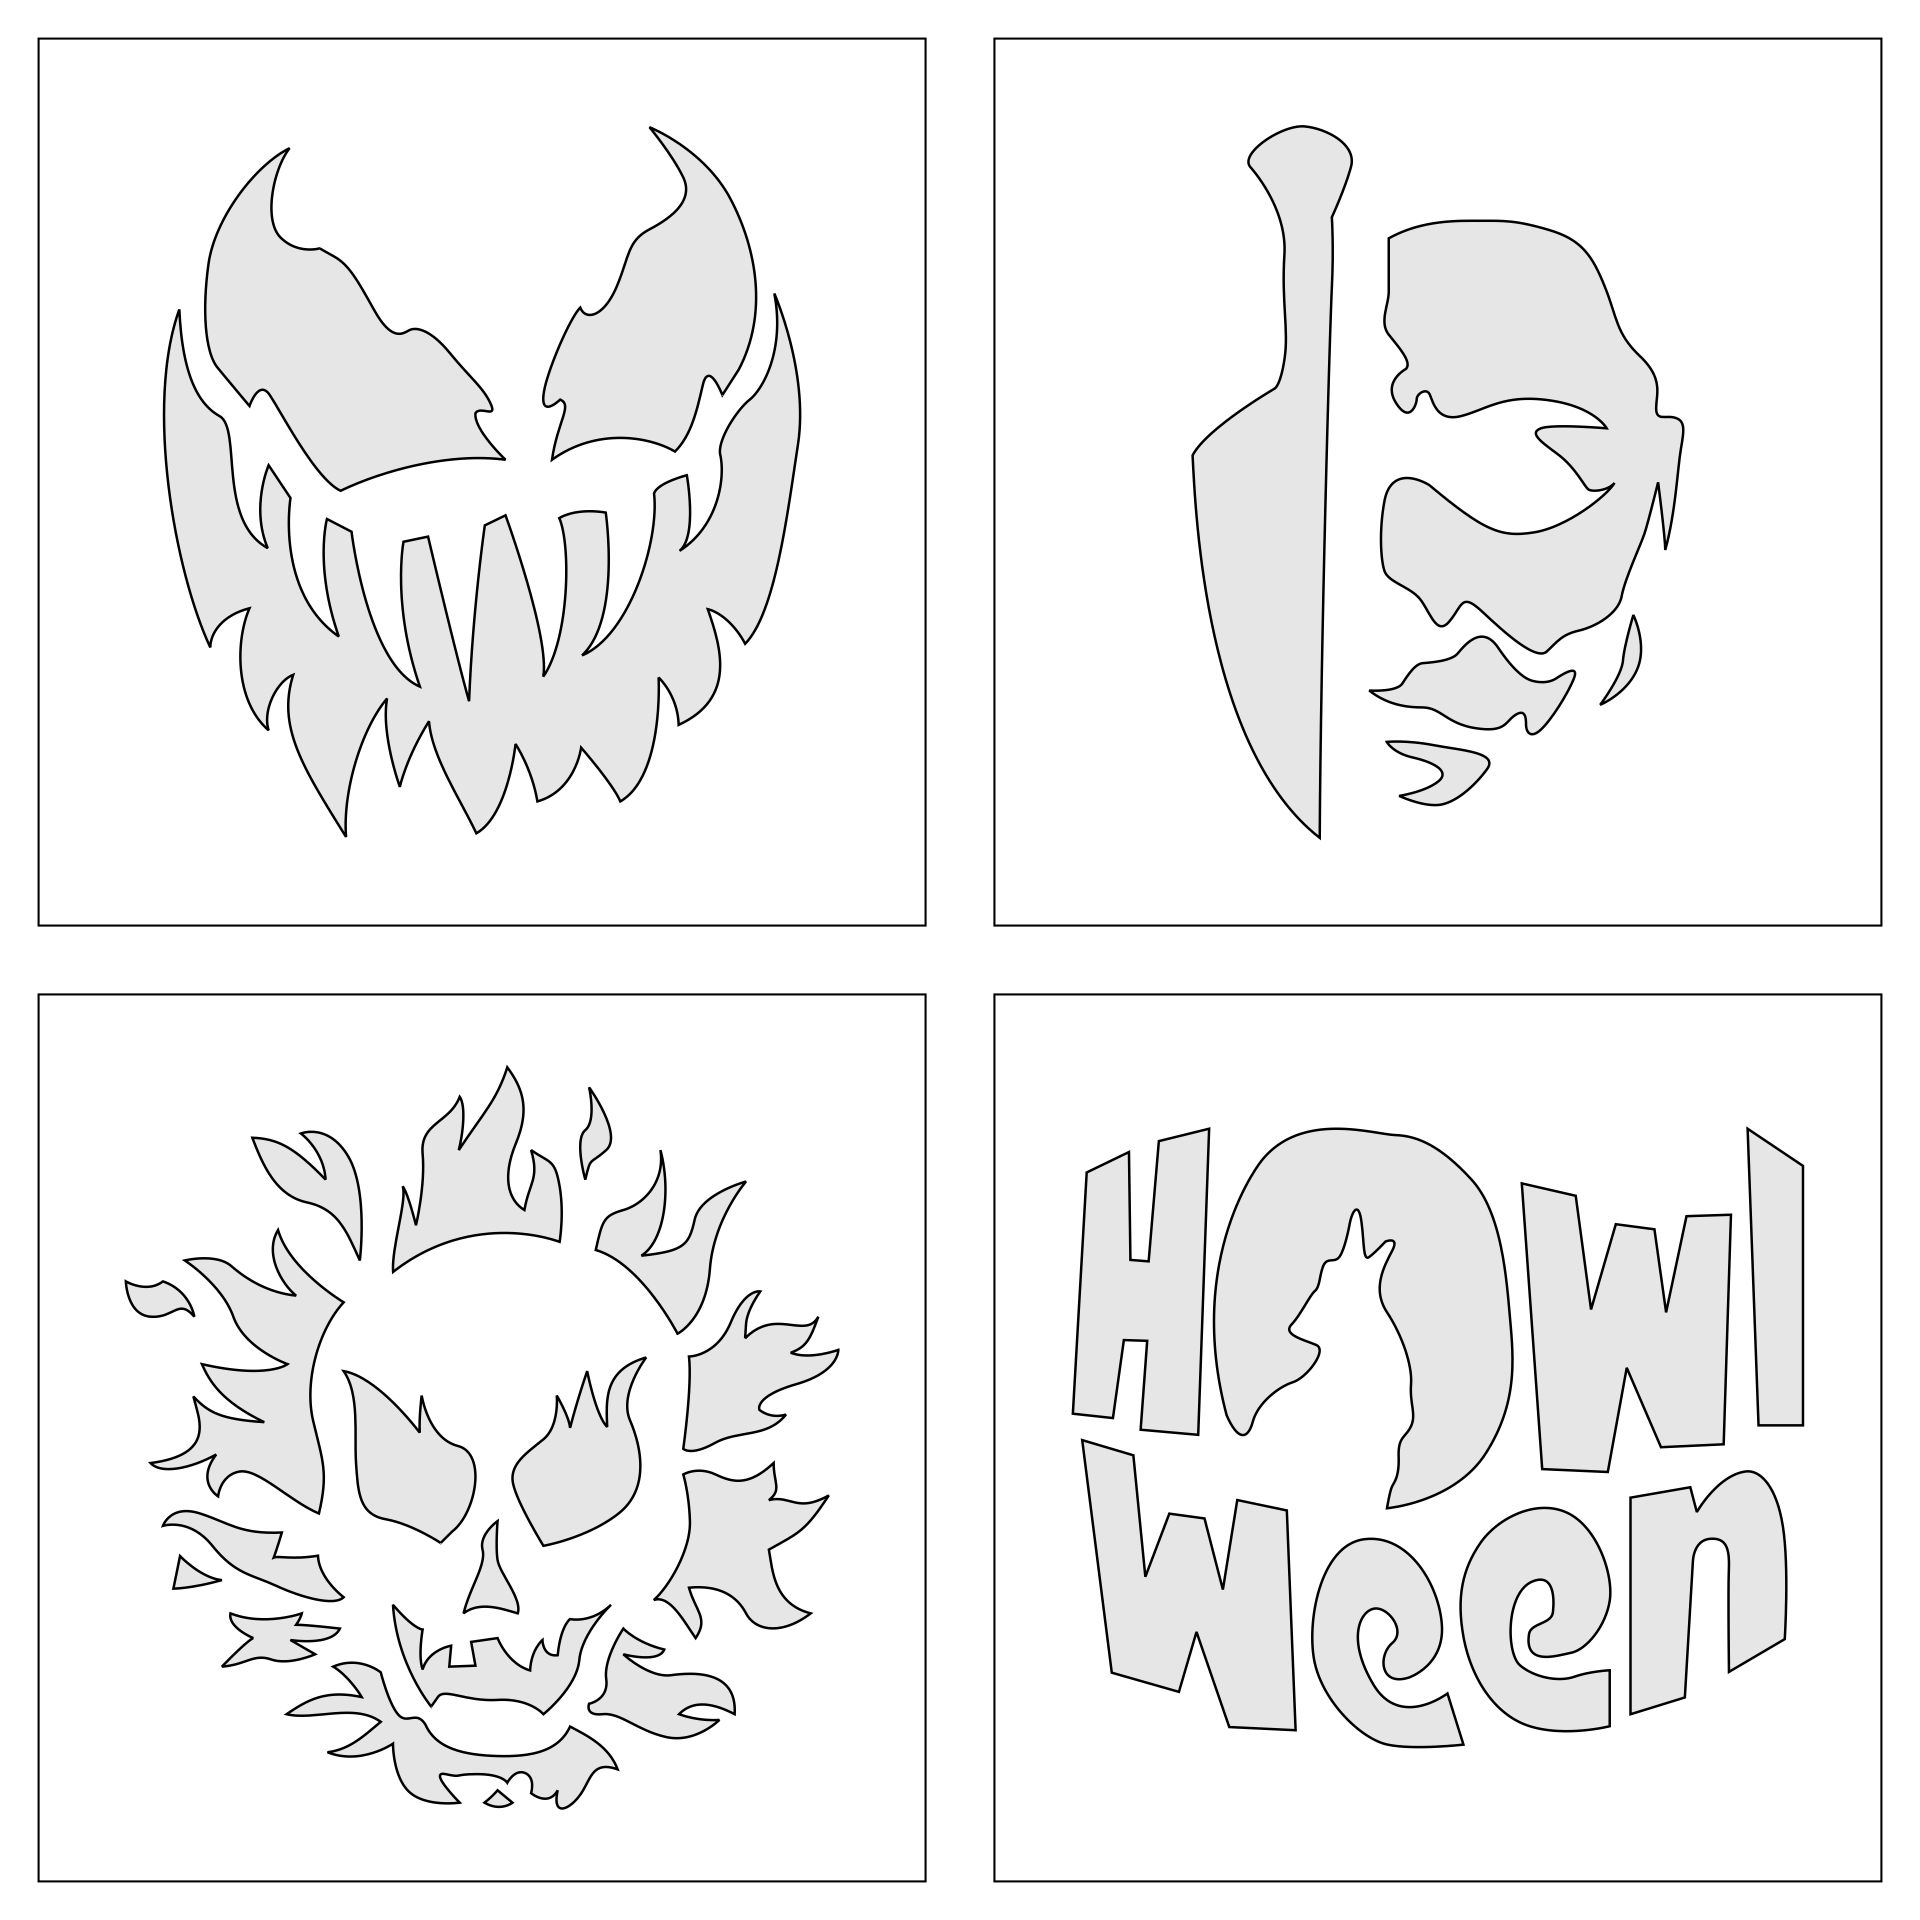 15 Best Printable Halloween Templates And Patterns PDF for Free at ...